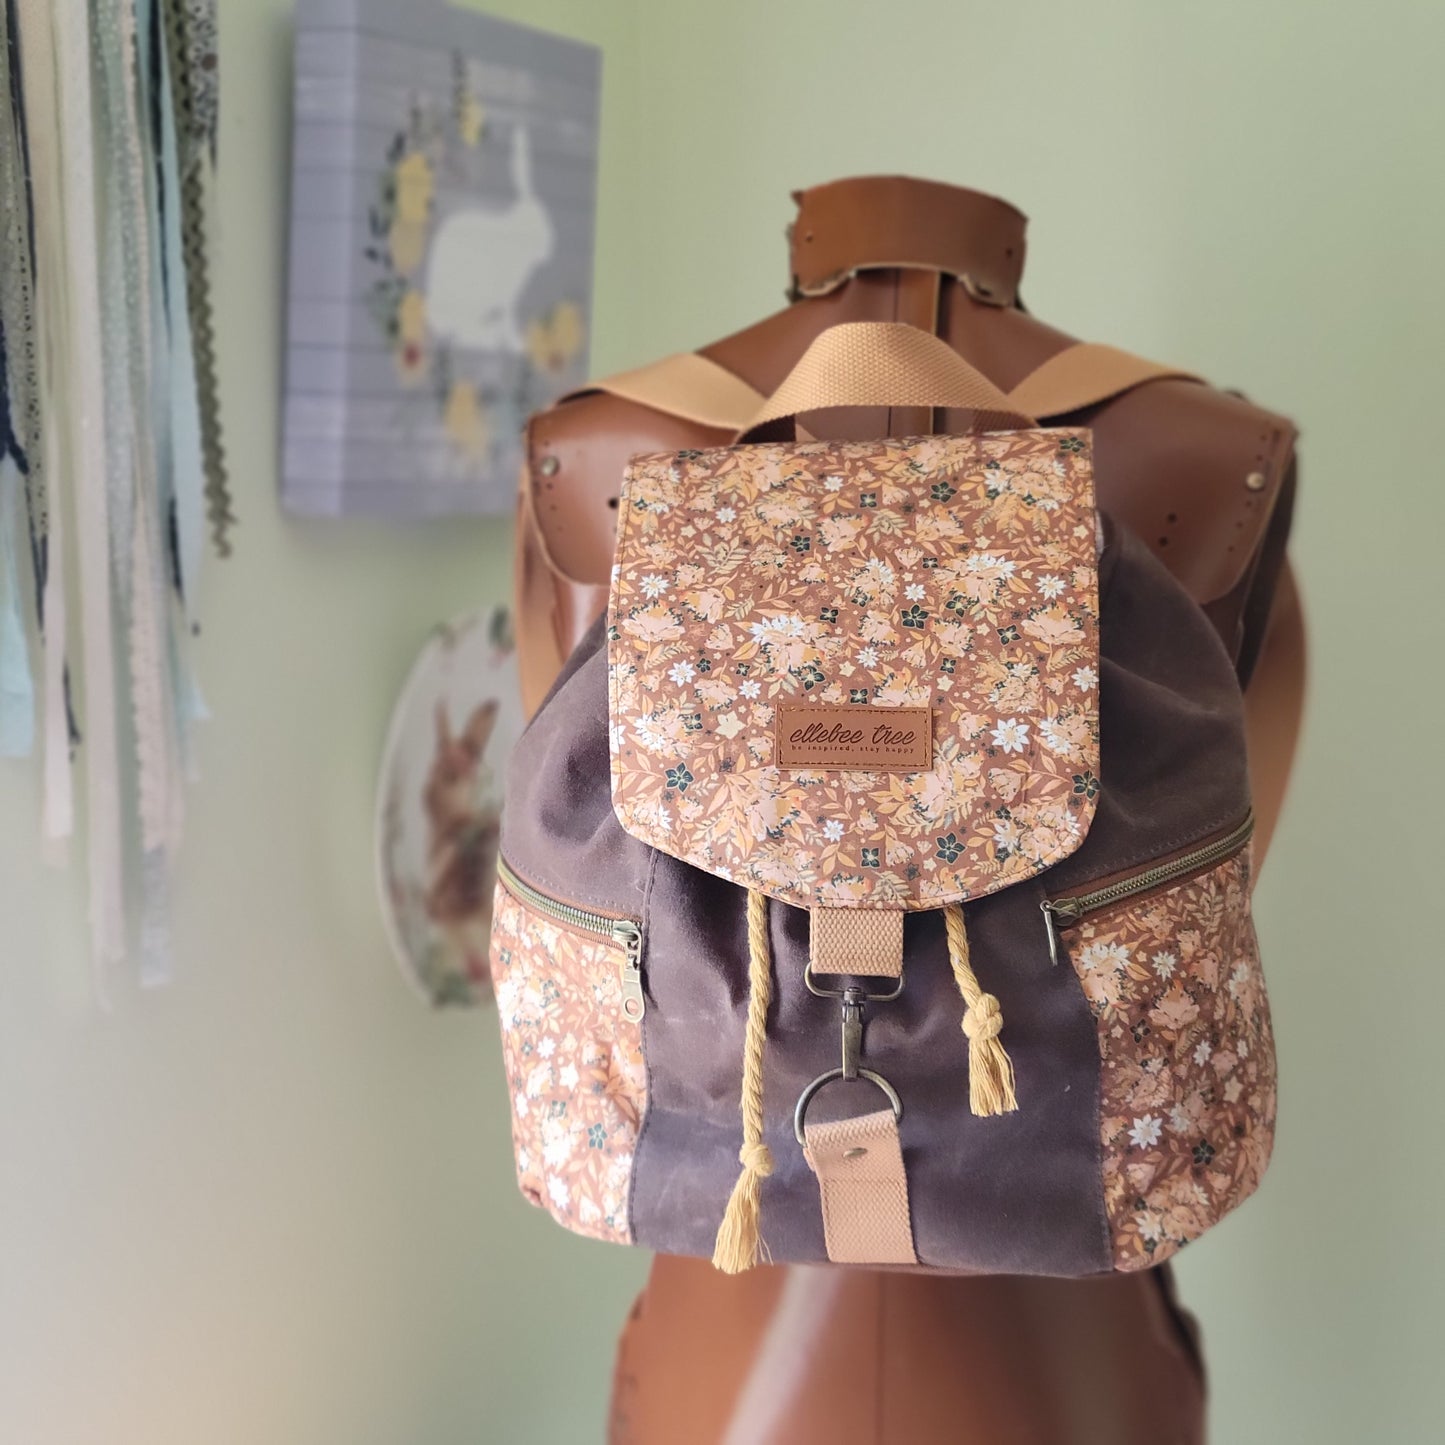 SAMPLE Autumn Florals Bee Balm Backpack